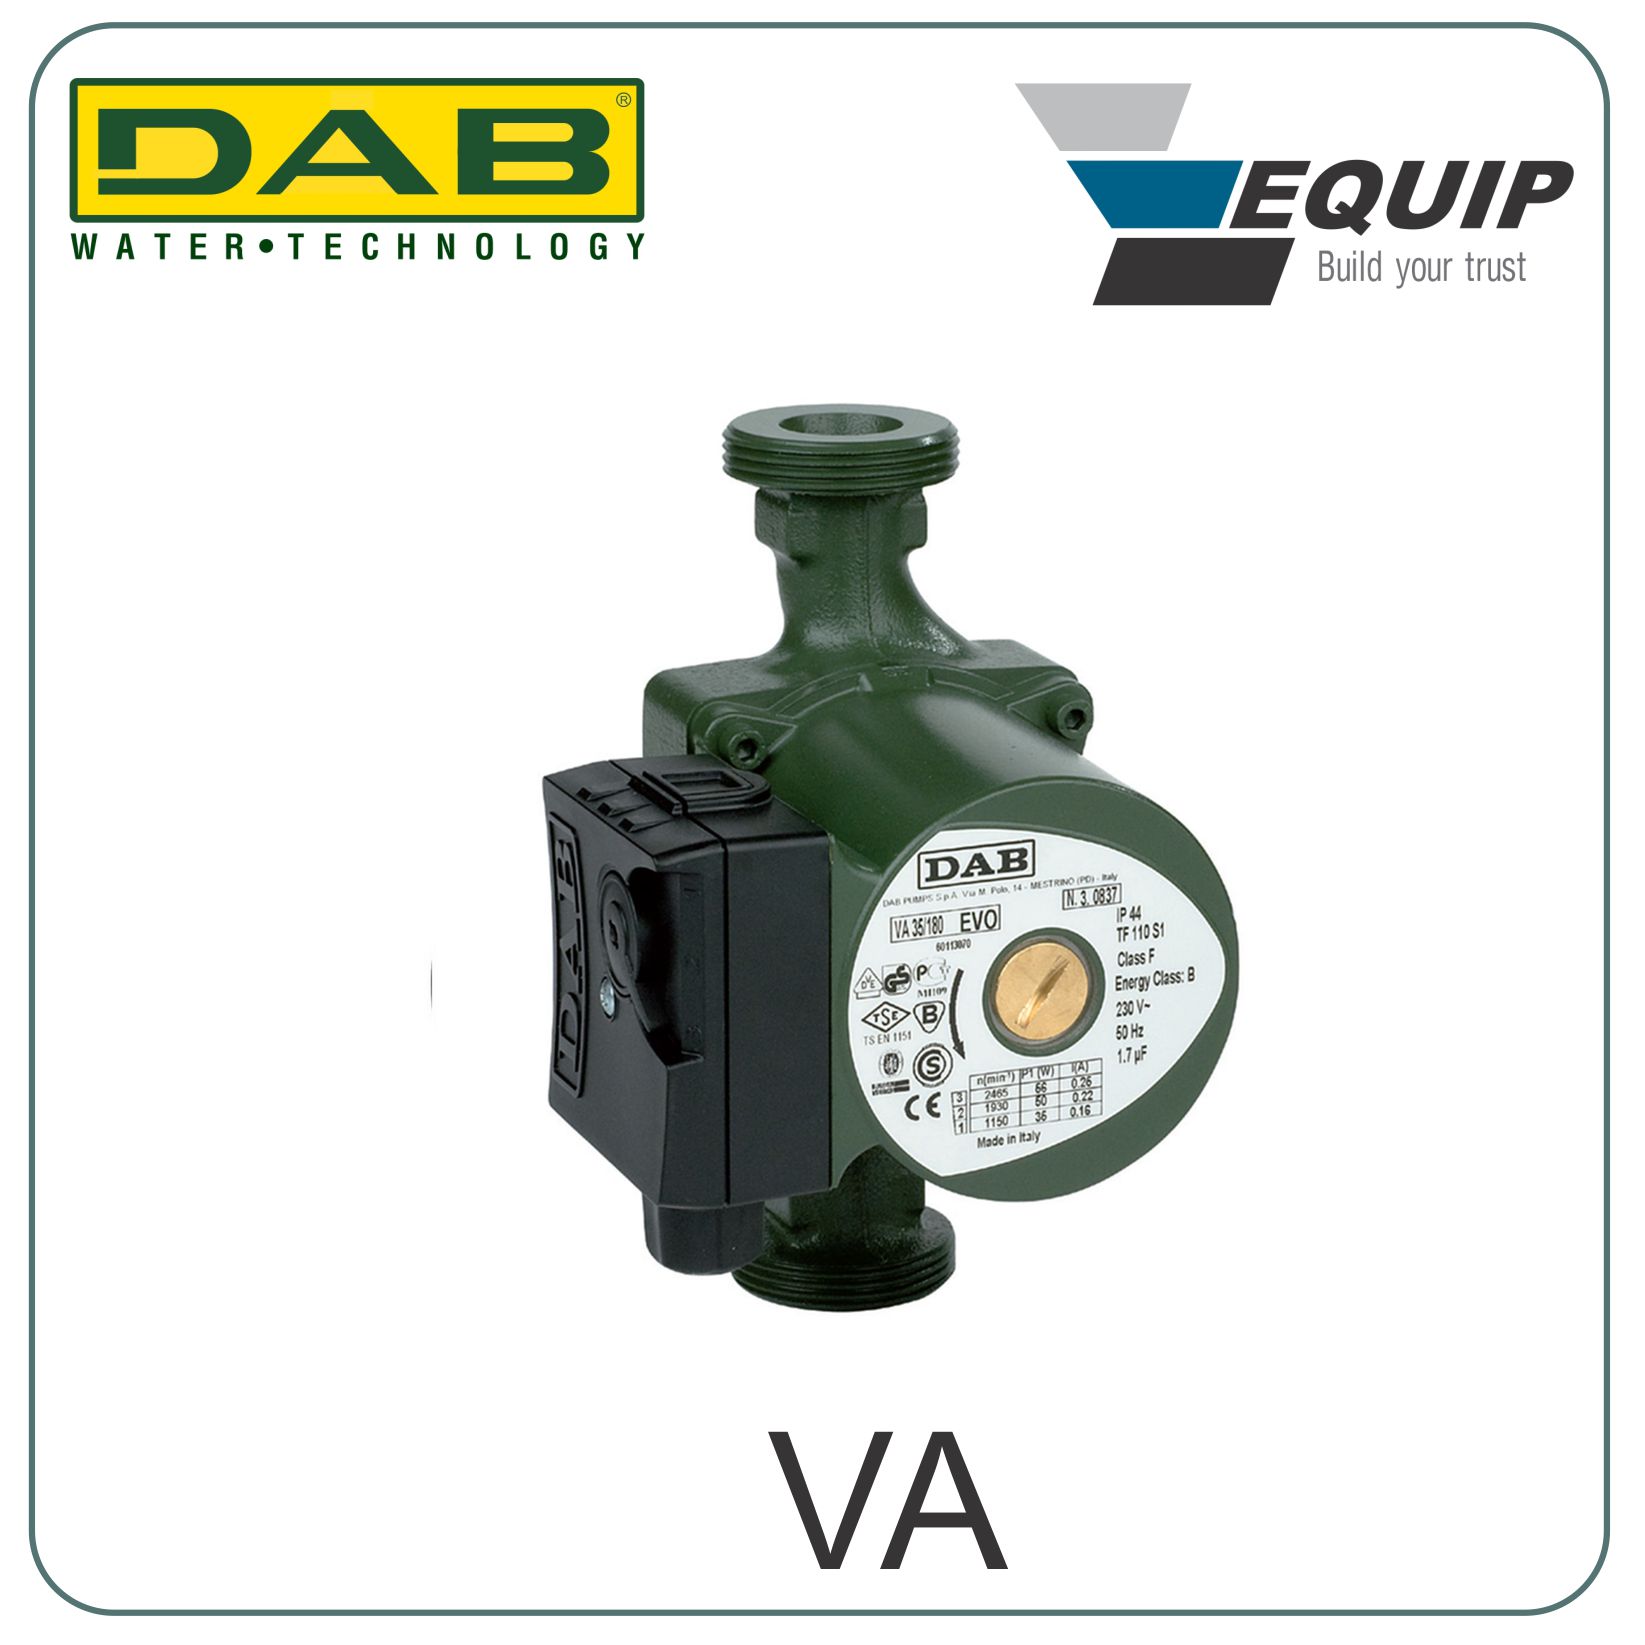 Heating pump for domestic DAB